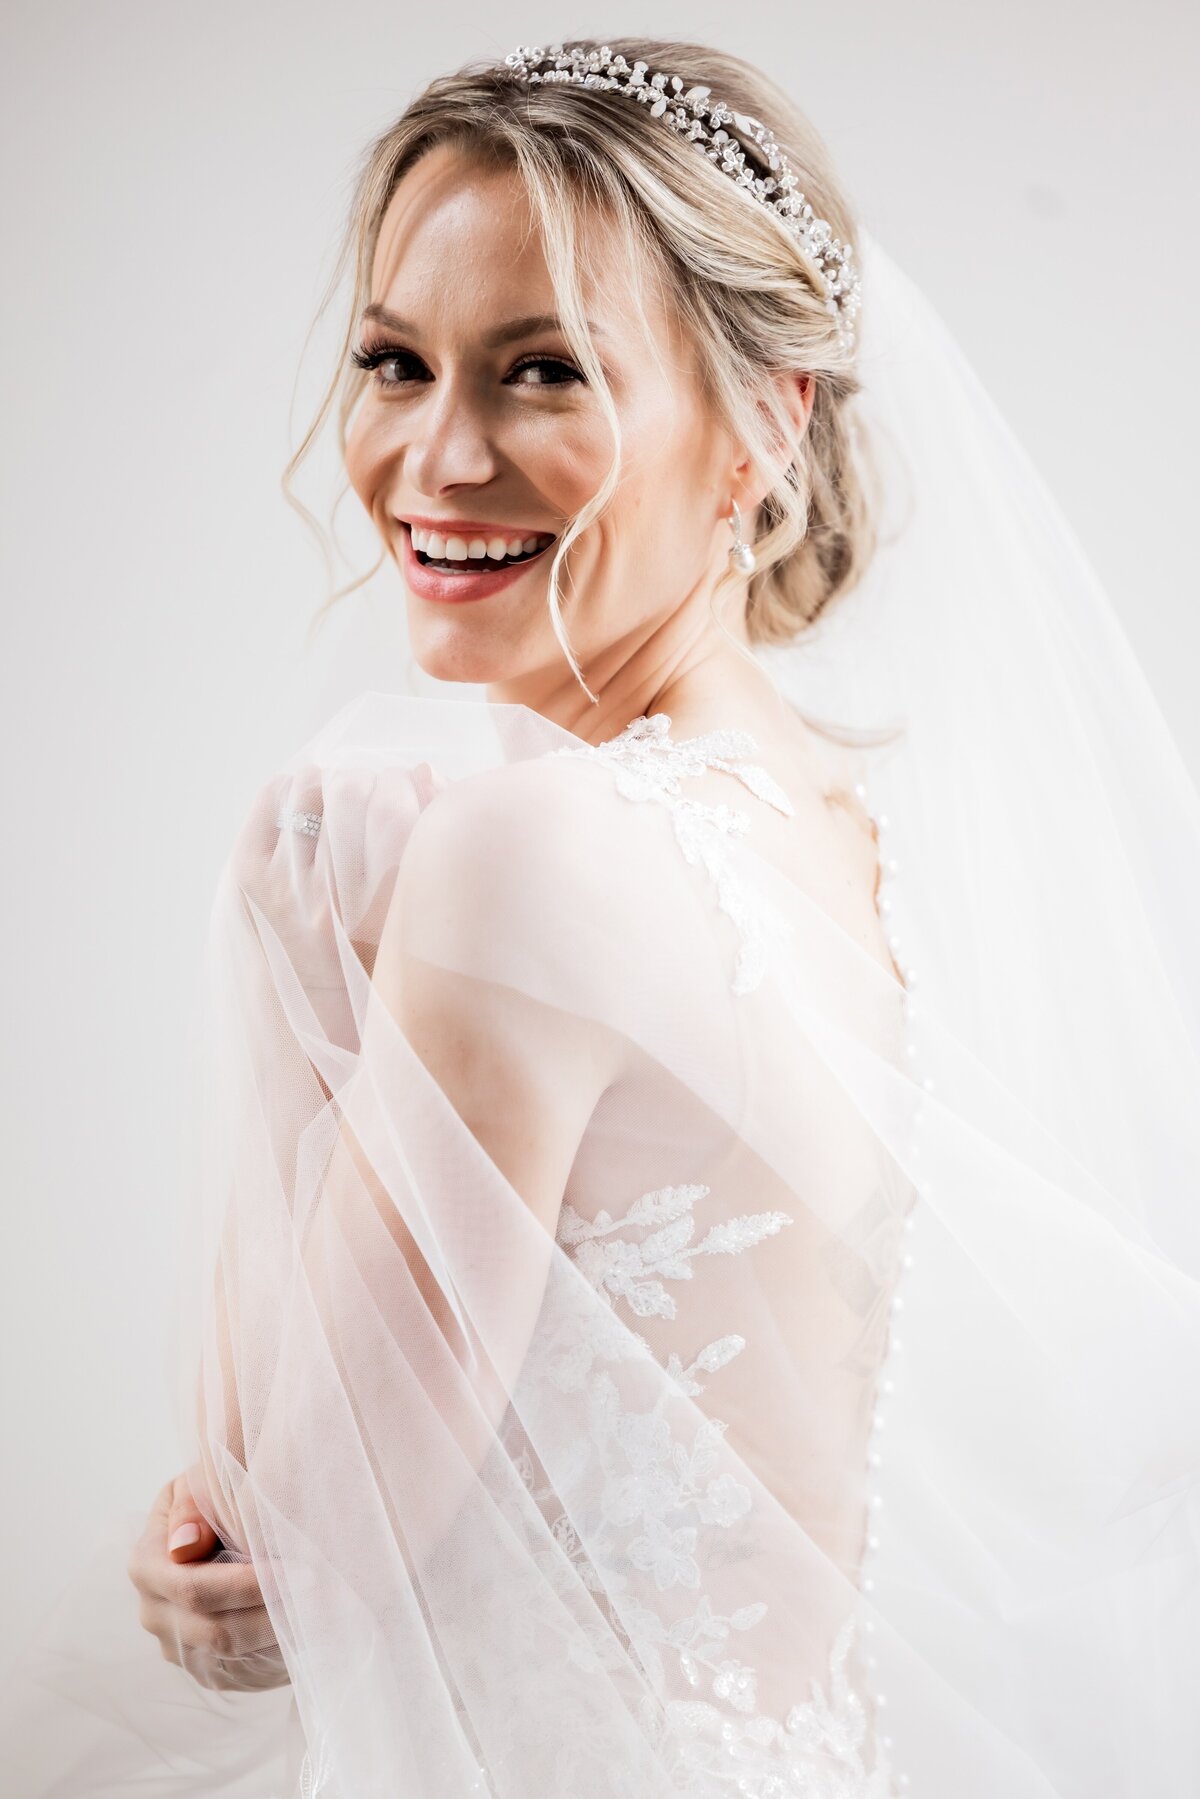 This joyful portrait captures Caro's beaming smile during her special day at The Bell Event Centre. The photograph showcases her happiness and the elegant setting of the venue, emphasizing the bliss and excitement of the wedding celebration. This image serves as beautiful inspiration for future brides and grooms planning their wedding photography, highlighting how a genuine smile can transform a lovely moment into an unforgettable memory.